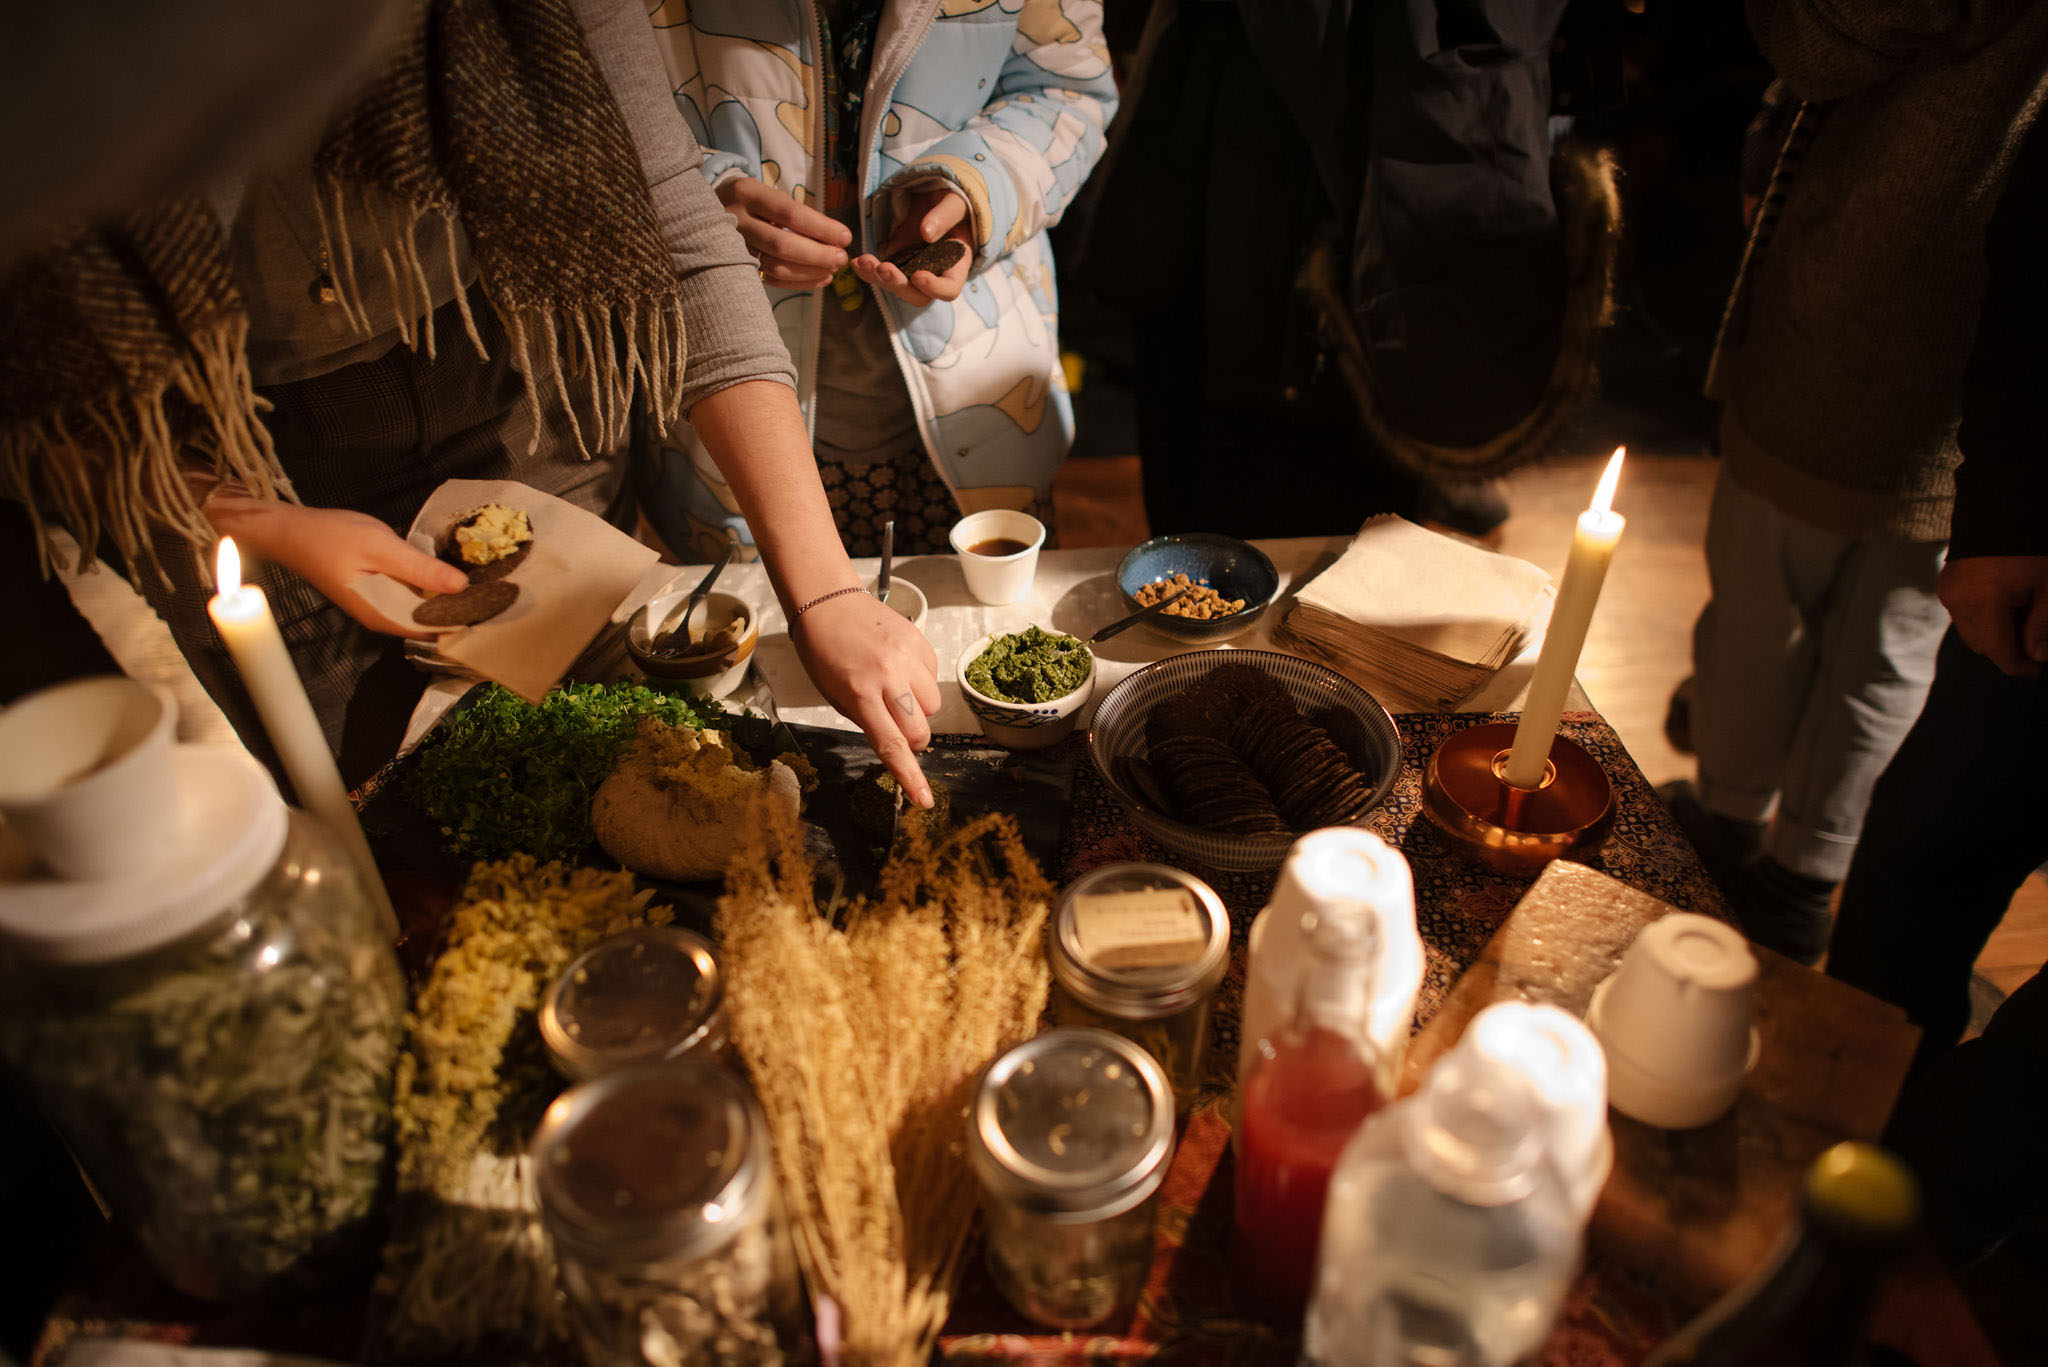 Image of food ingredients on a table with people gathered around 